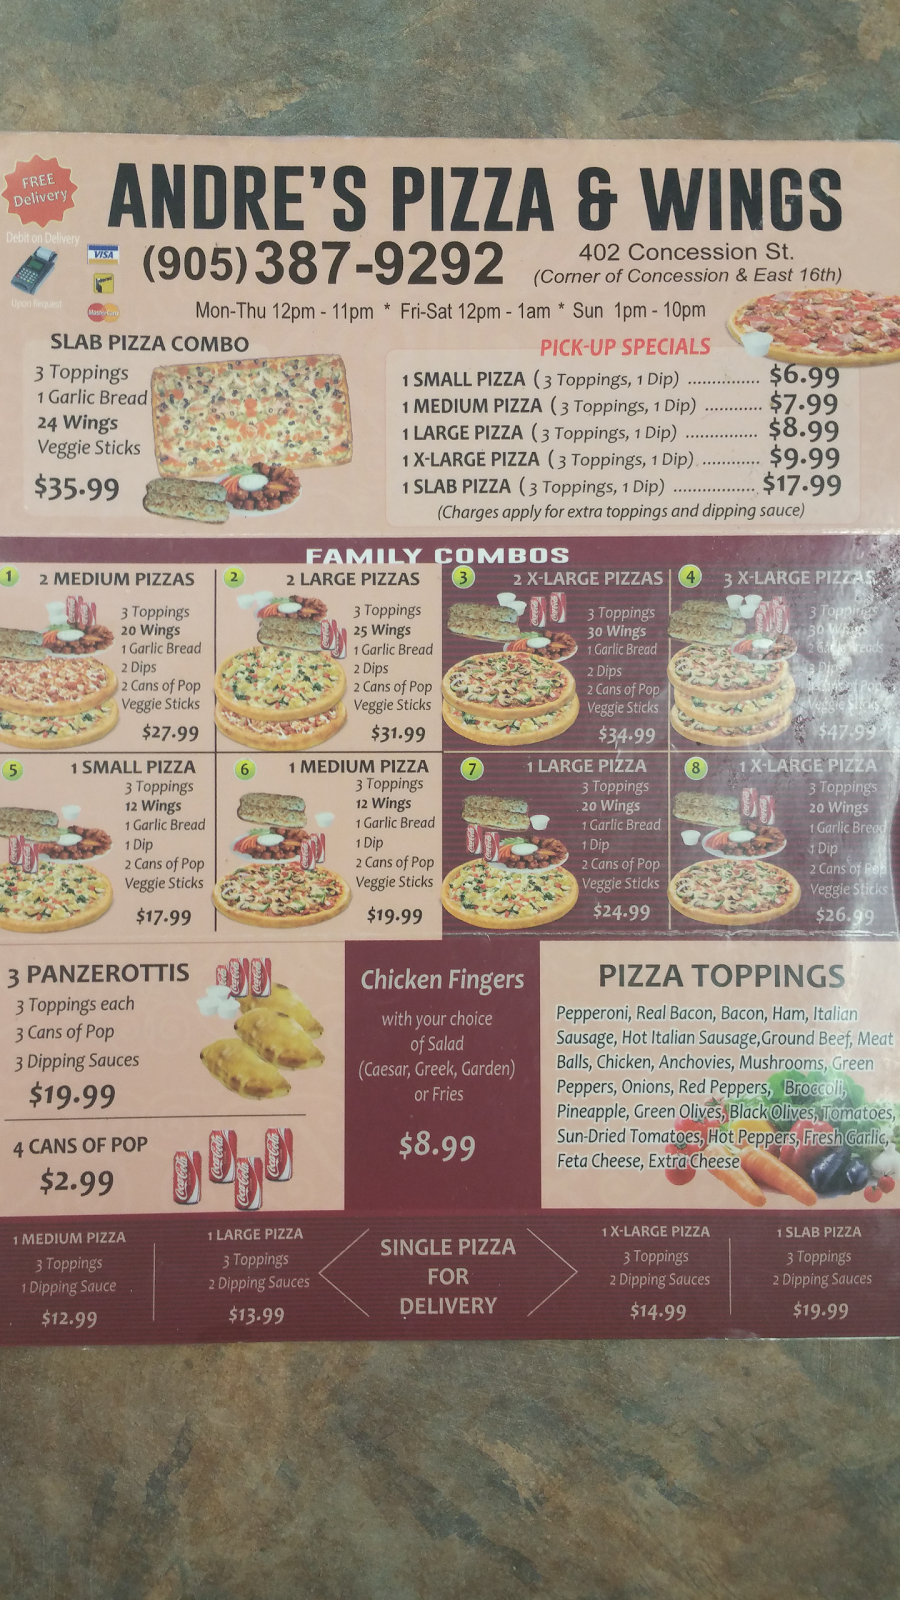 Andres Pizza & Wings | restaurant | 402 Concession St, Hamilton, ON L9A 1B7, Canada | 9053879292 OR +1 905-387-9292